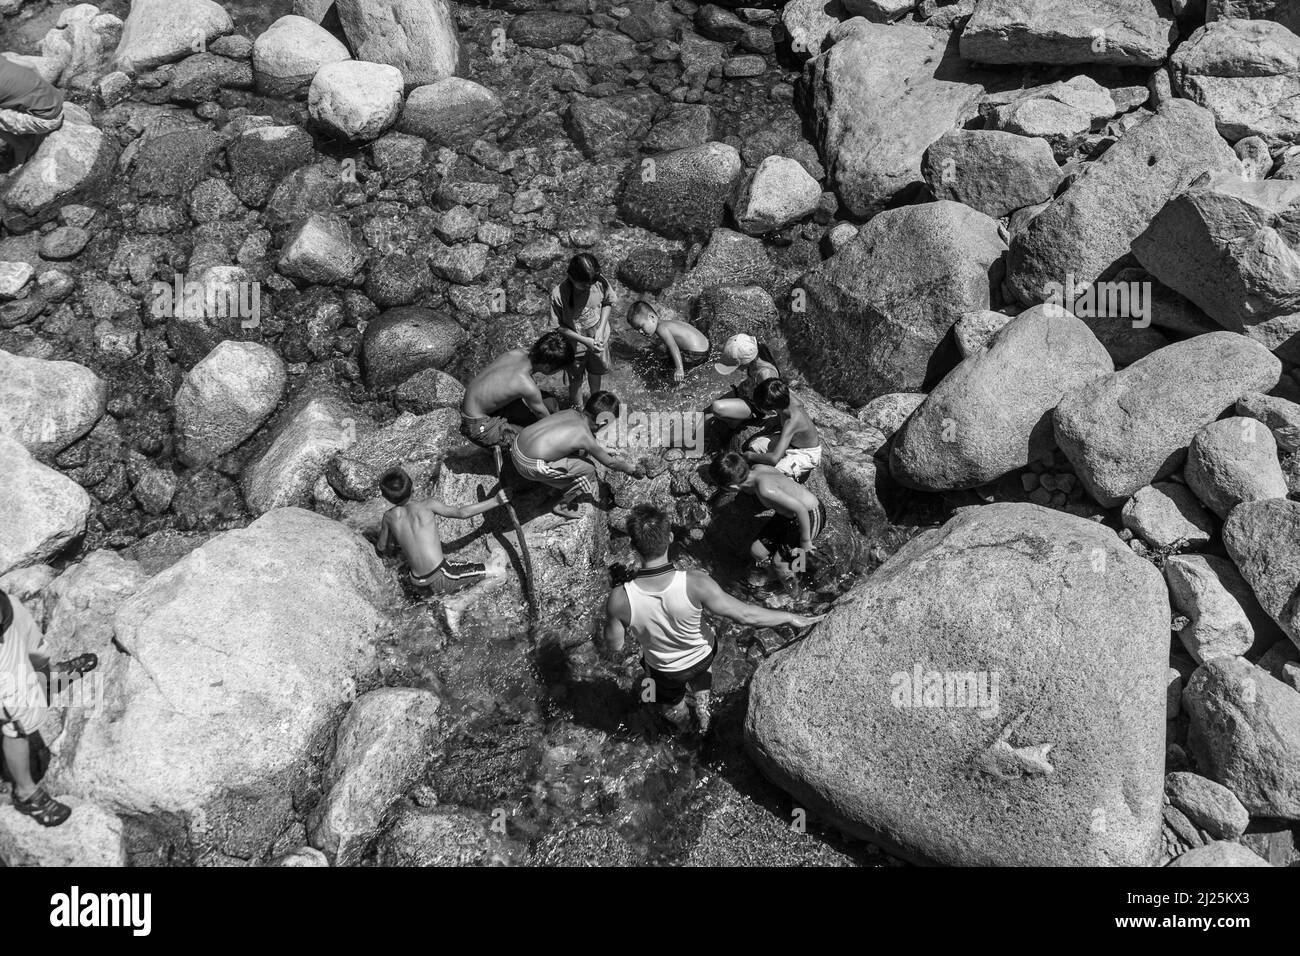 Yosemite Park, USA - July 22, 2008:  tourists cool their legs in the lake of the lower Yosemite waterfall in Yosemite, USA. In 1890, the U.S. Congress Stock Photo